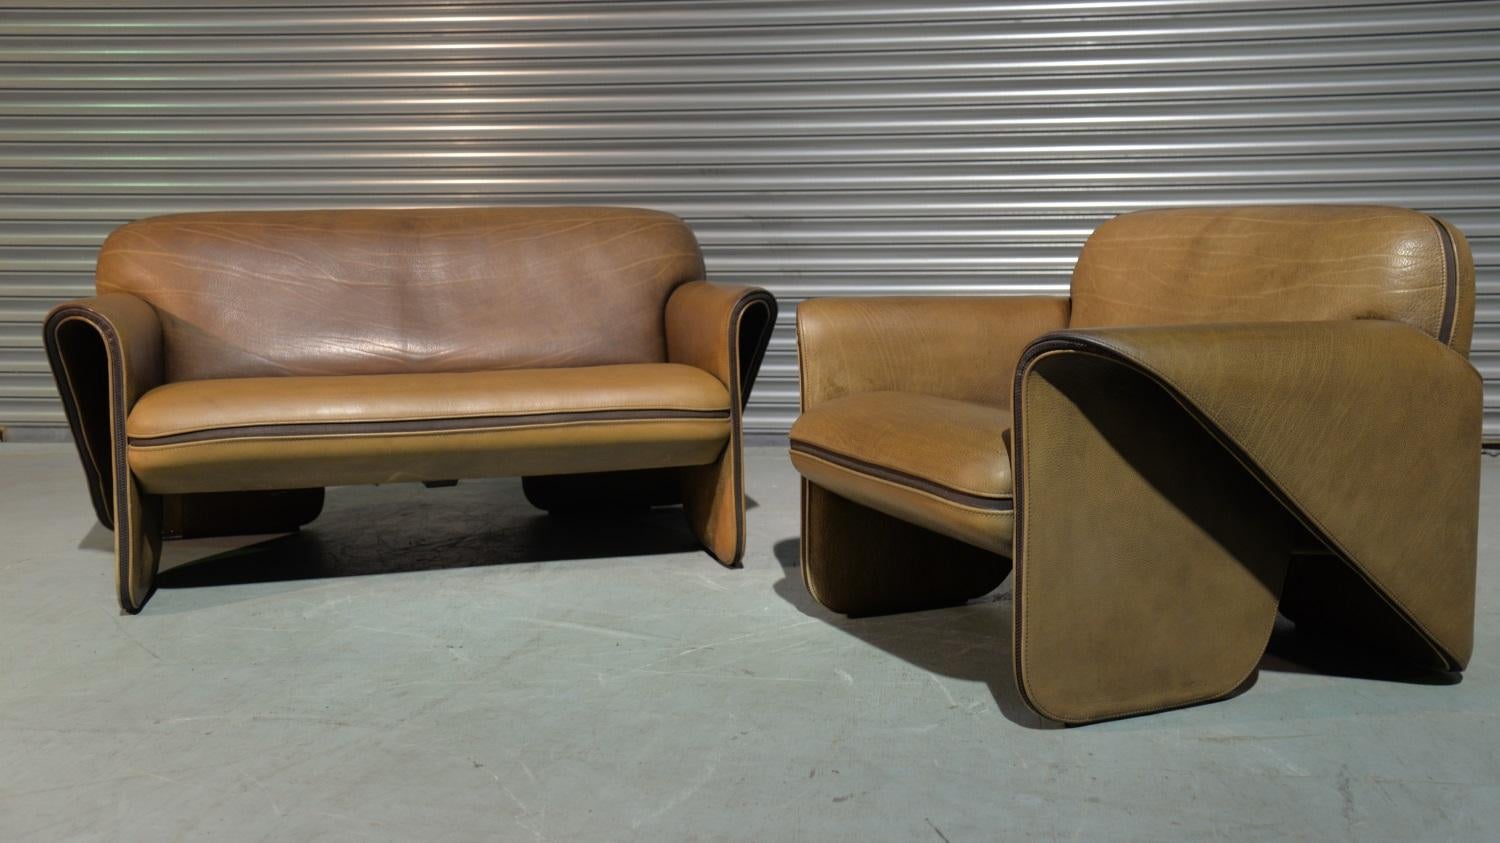 Discounted airfreight for our US and International customers ( from 2 weeks door to door)

We are delighted to bring to you an ultra rare vintage De Sede DS 125 sofa and armchair designed by Gerd Lange in 1978. These sculptural pieces are